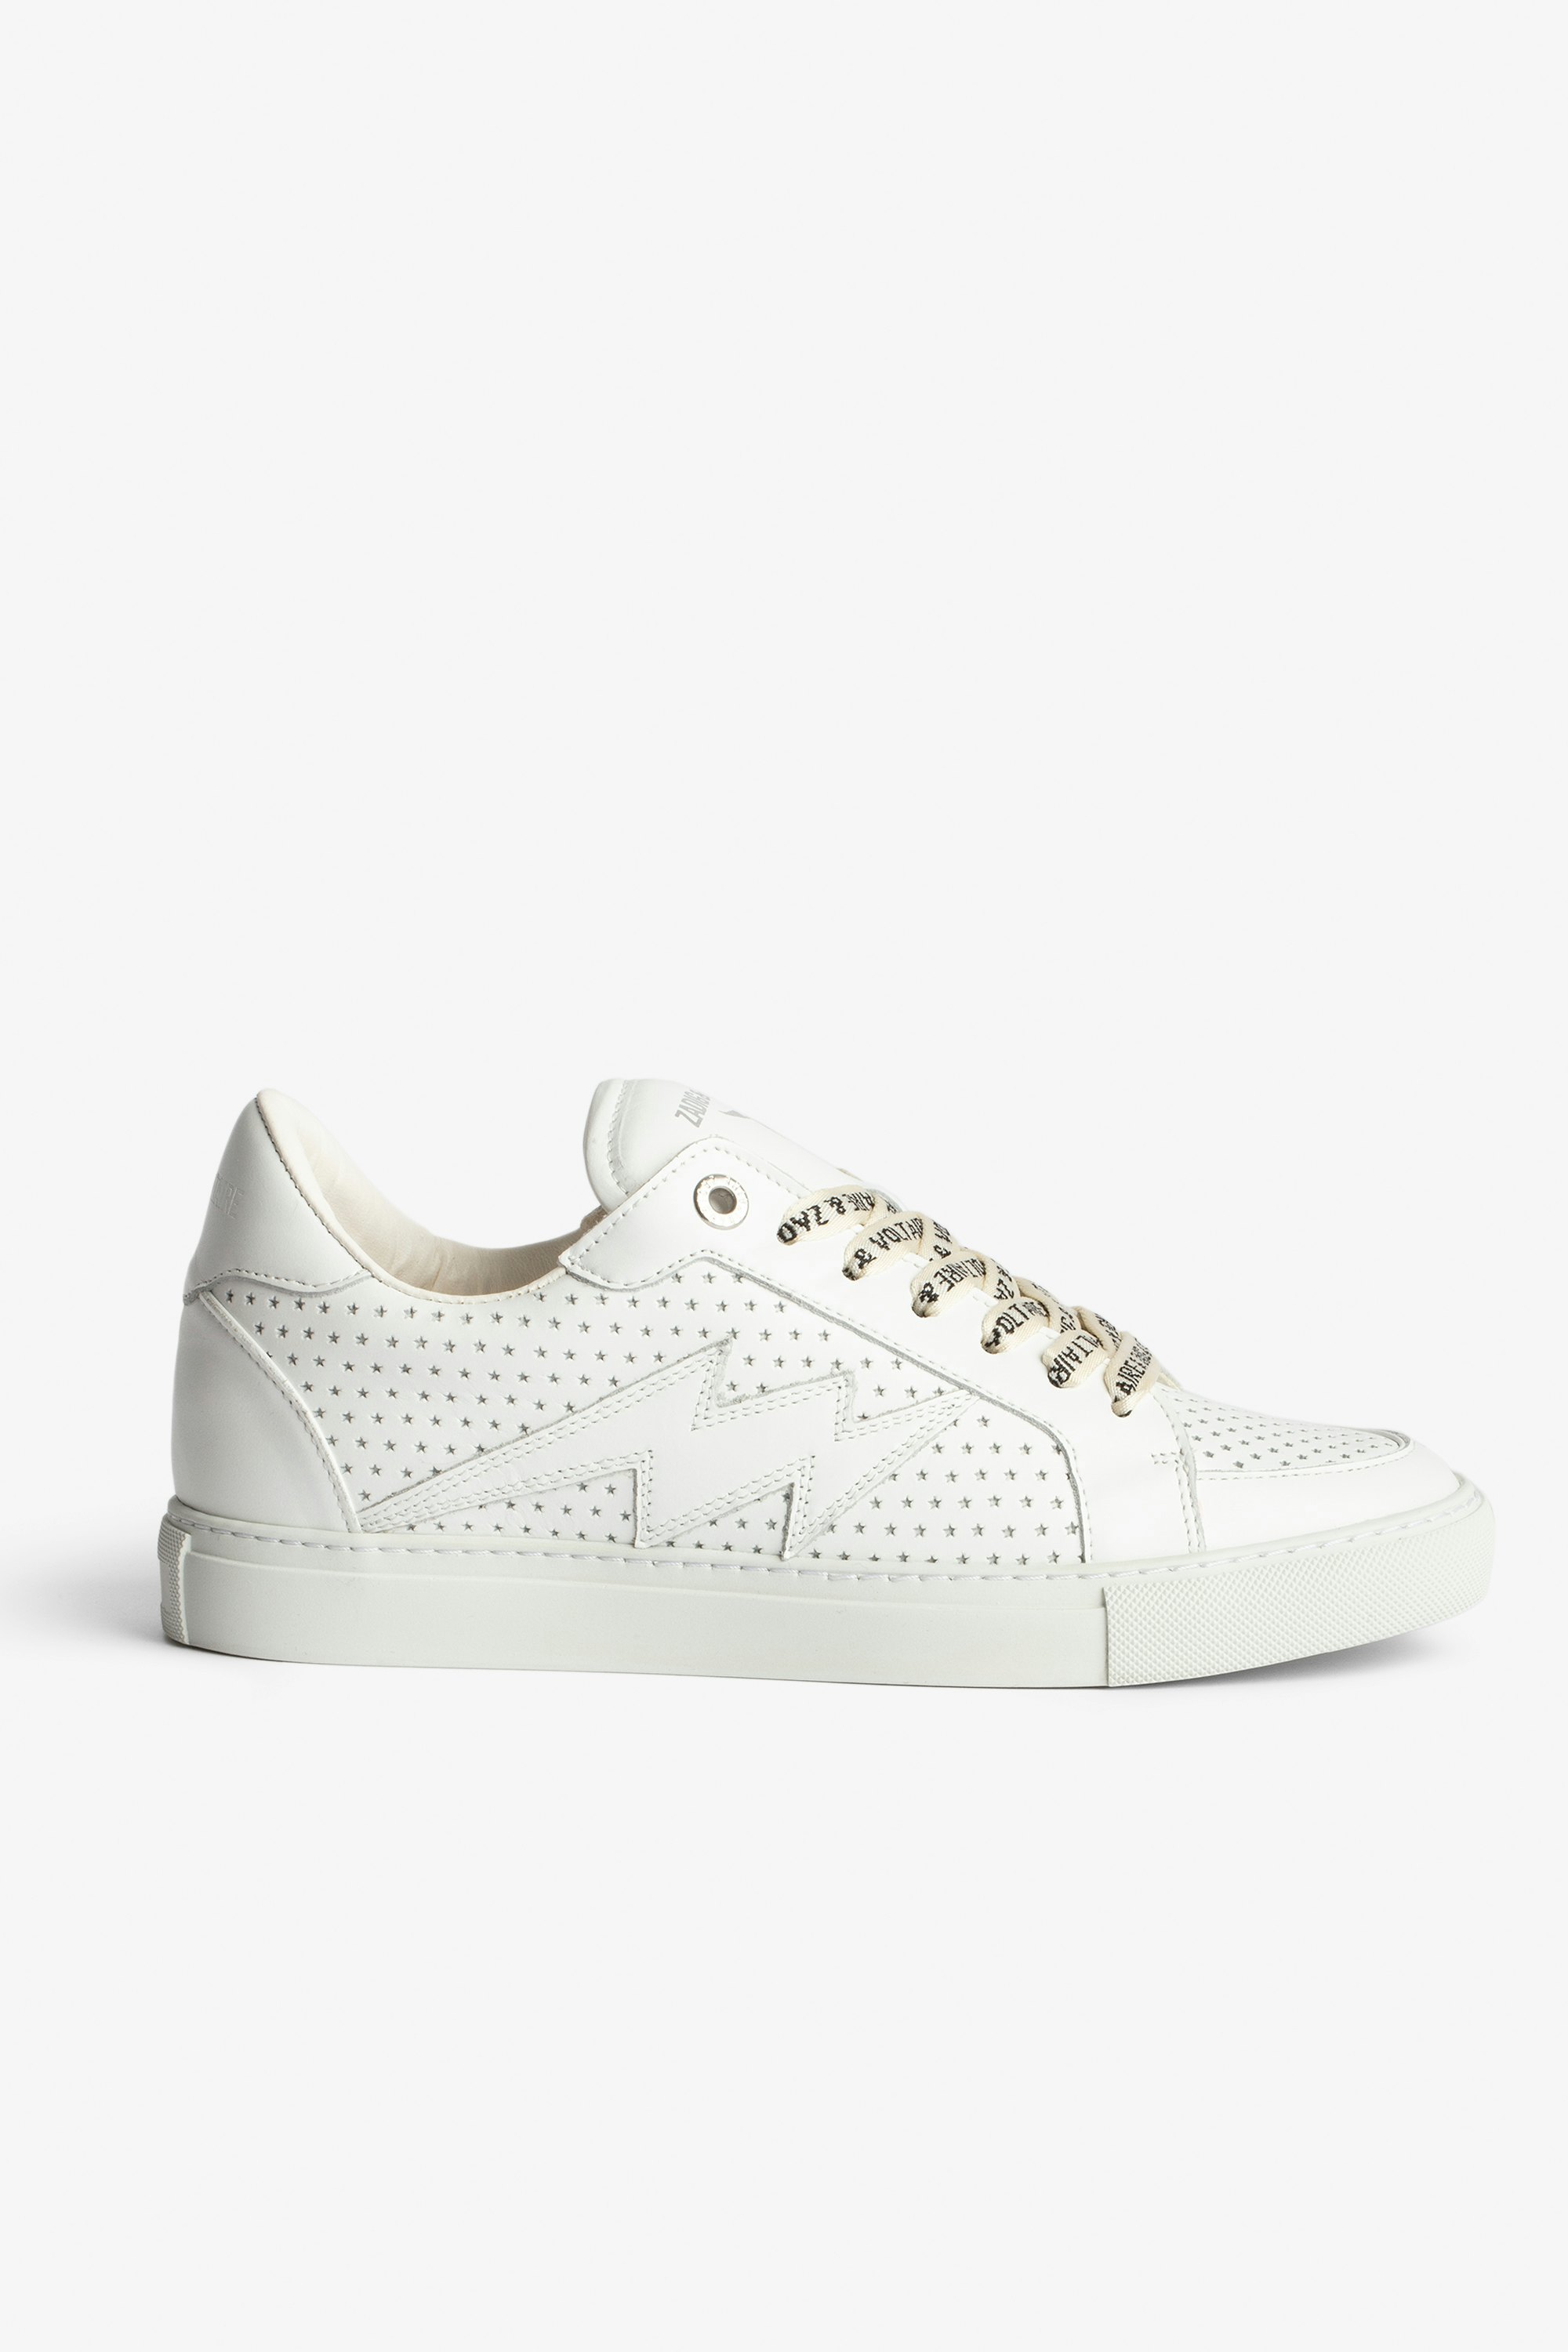 La Flash Trainers Women's low-top trainers in smooth white leather with perforated stars.